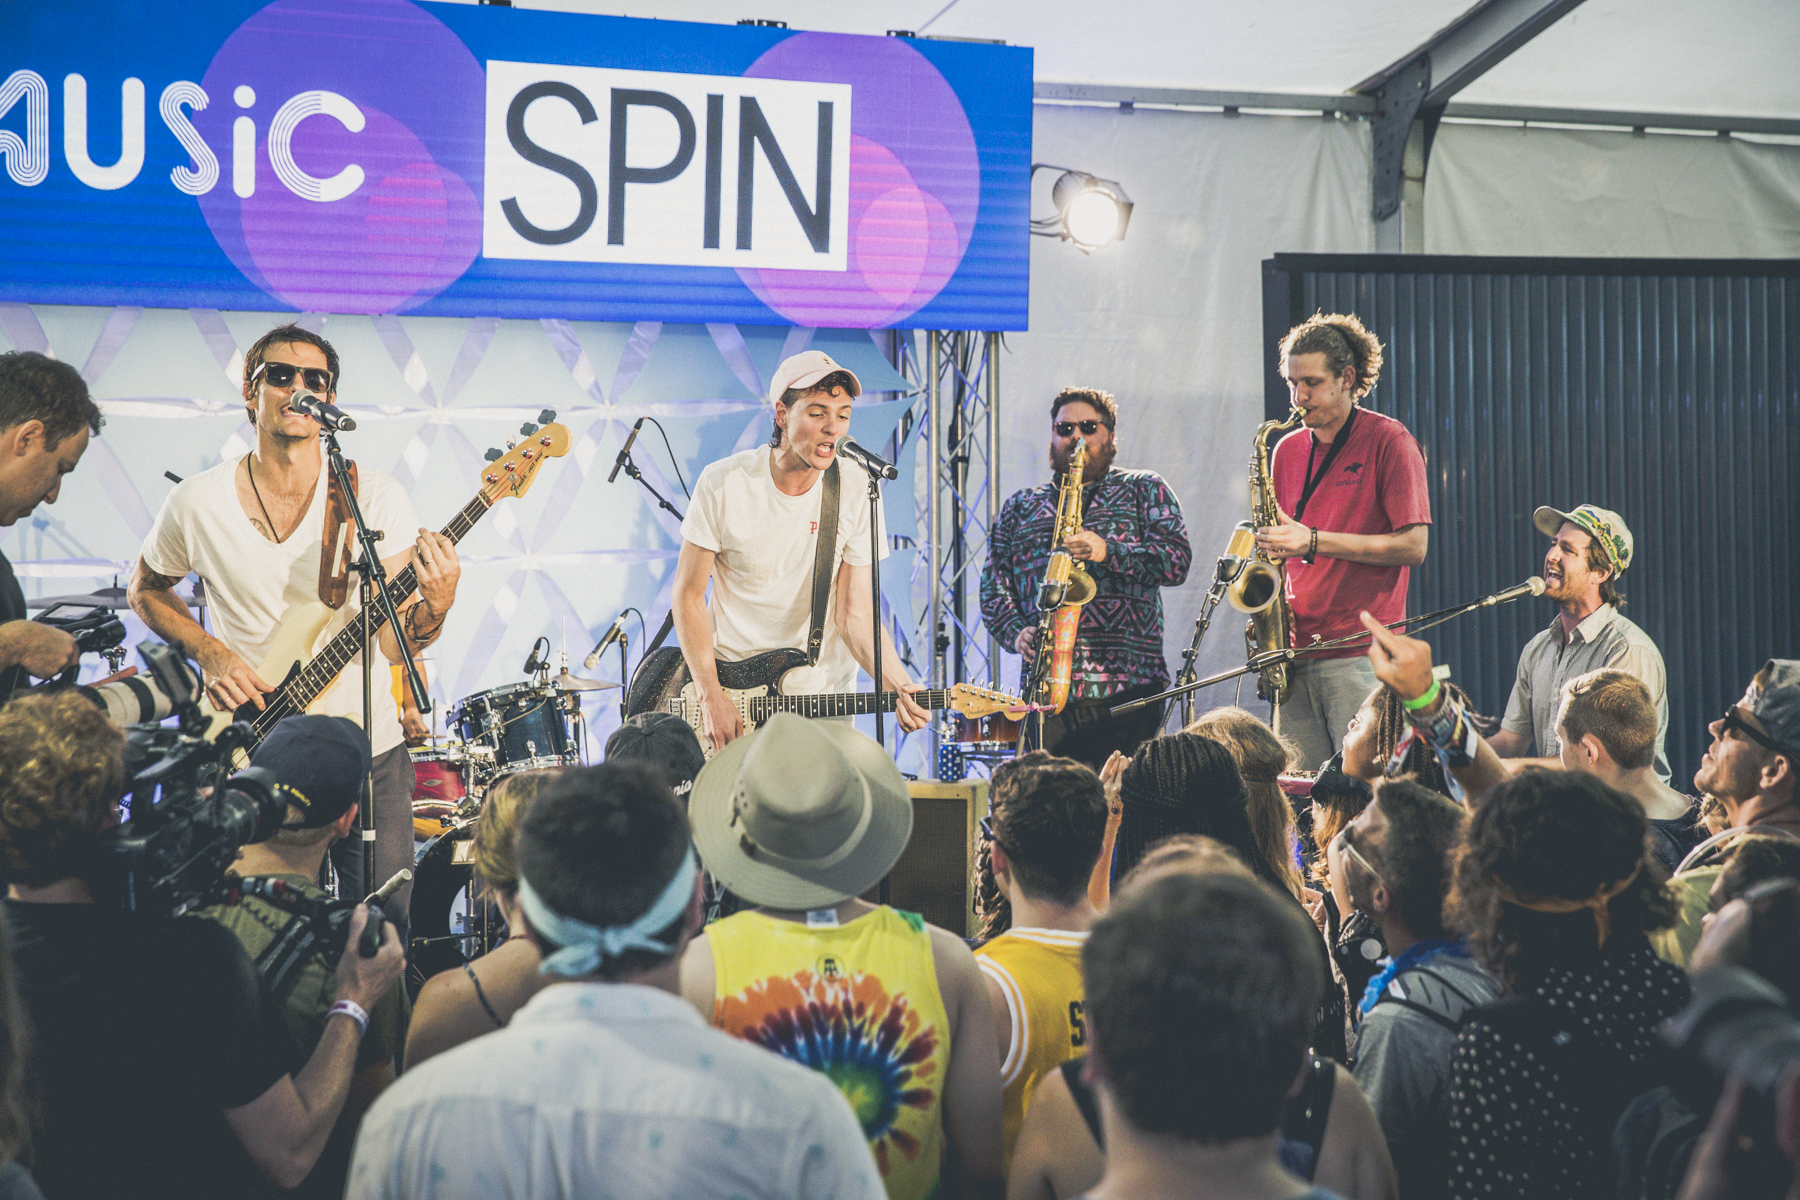 SPIN at Lollapalooza 2016: Day 2 at Toyota Music Den with Frank Turner, Louis the Child, and More